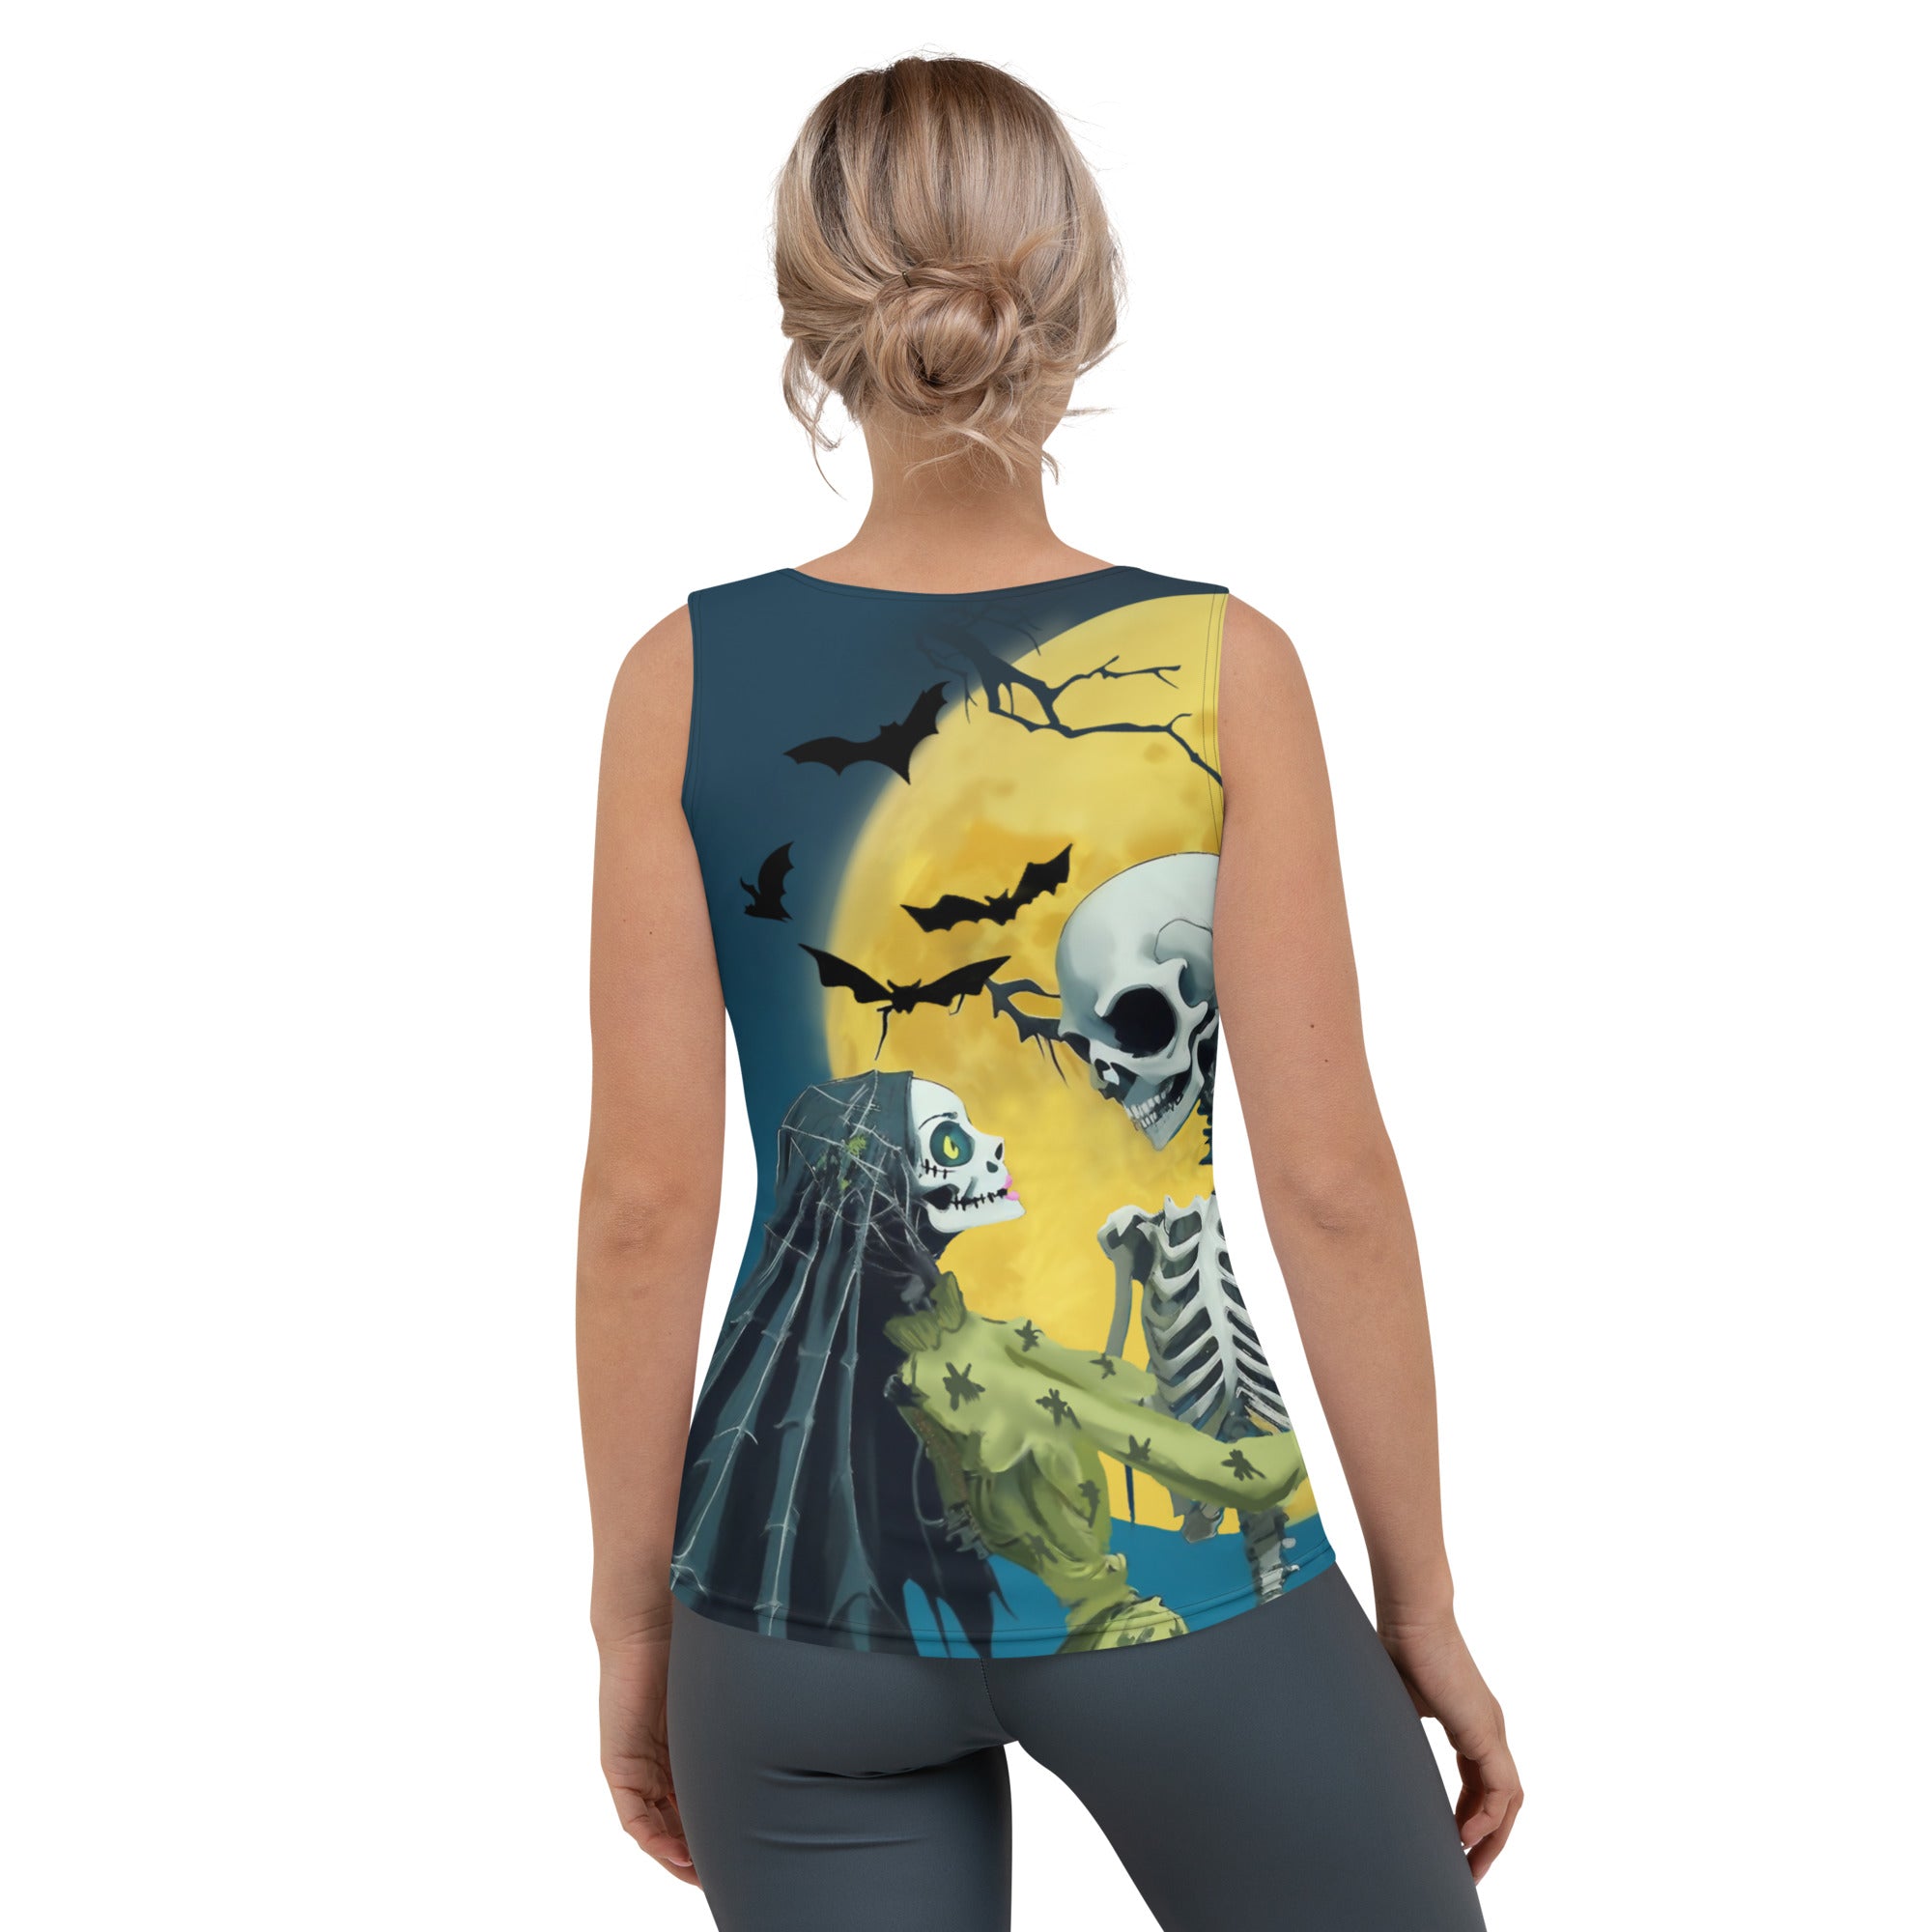 Skeleton and Zombie Tank Top